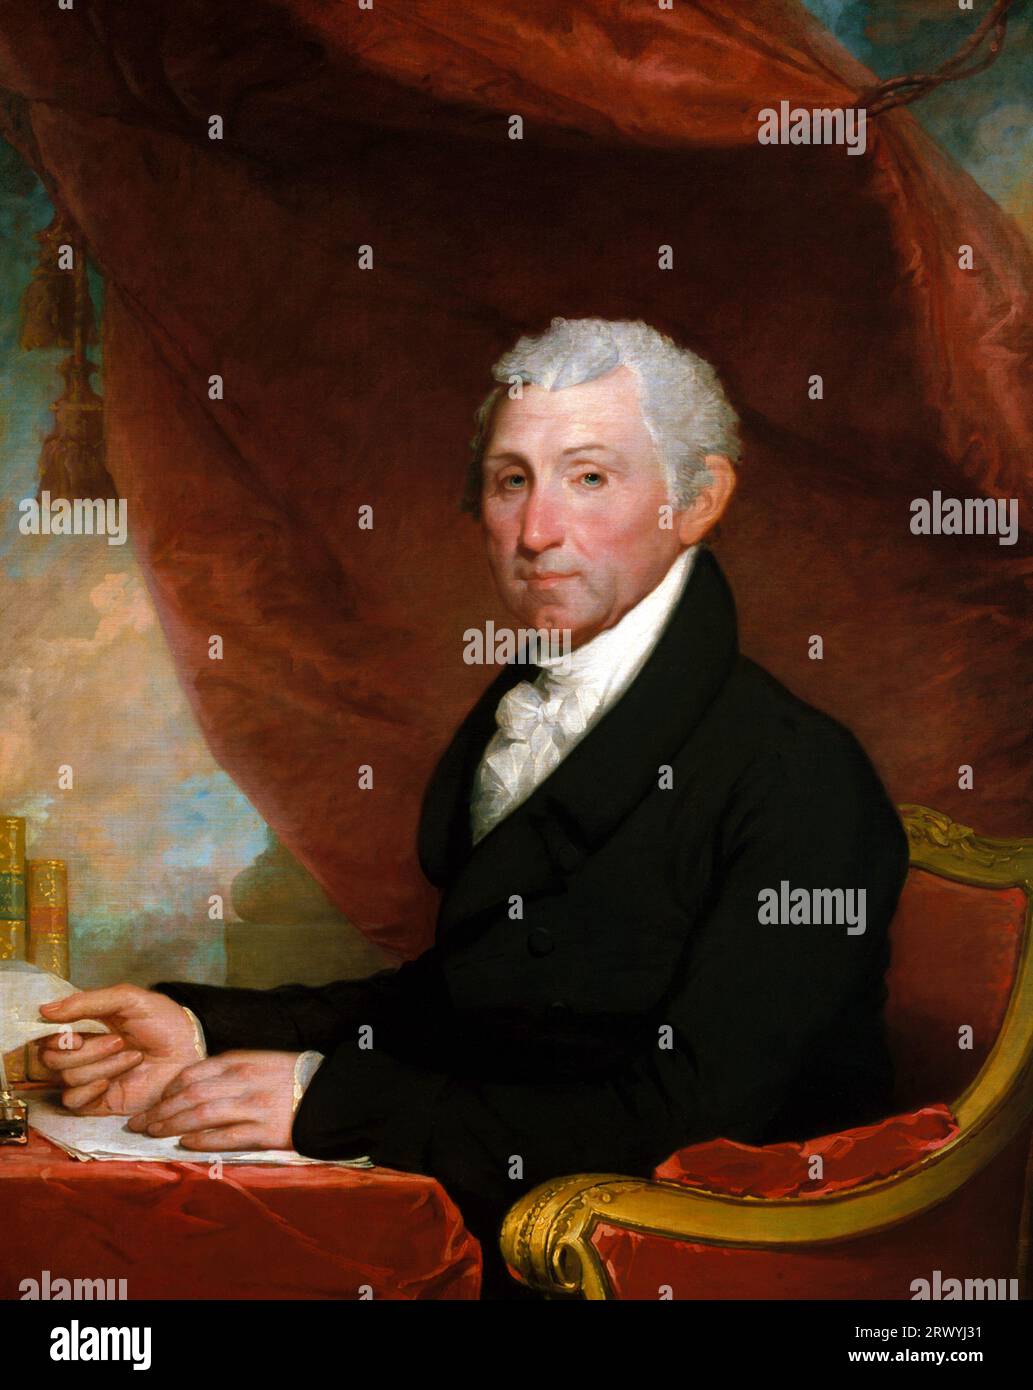 James Monroe (1758 – 1831) American politician, statesman, Founding Father and served as the fifth president of the United States from 1817 to 1825, James Monroe, The fifth President of the United States, James Monroe, c. 1820–1822 Painting by Gilbert Stuart Stock Photo